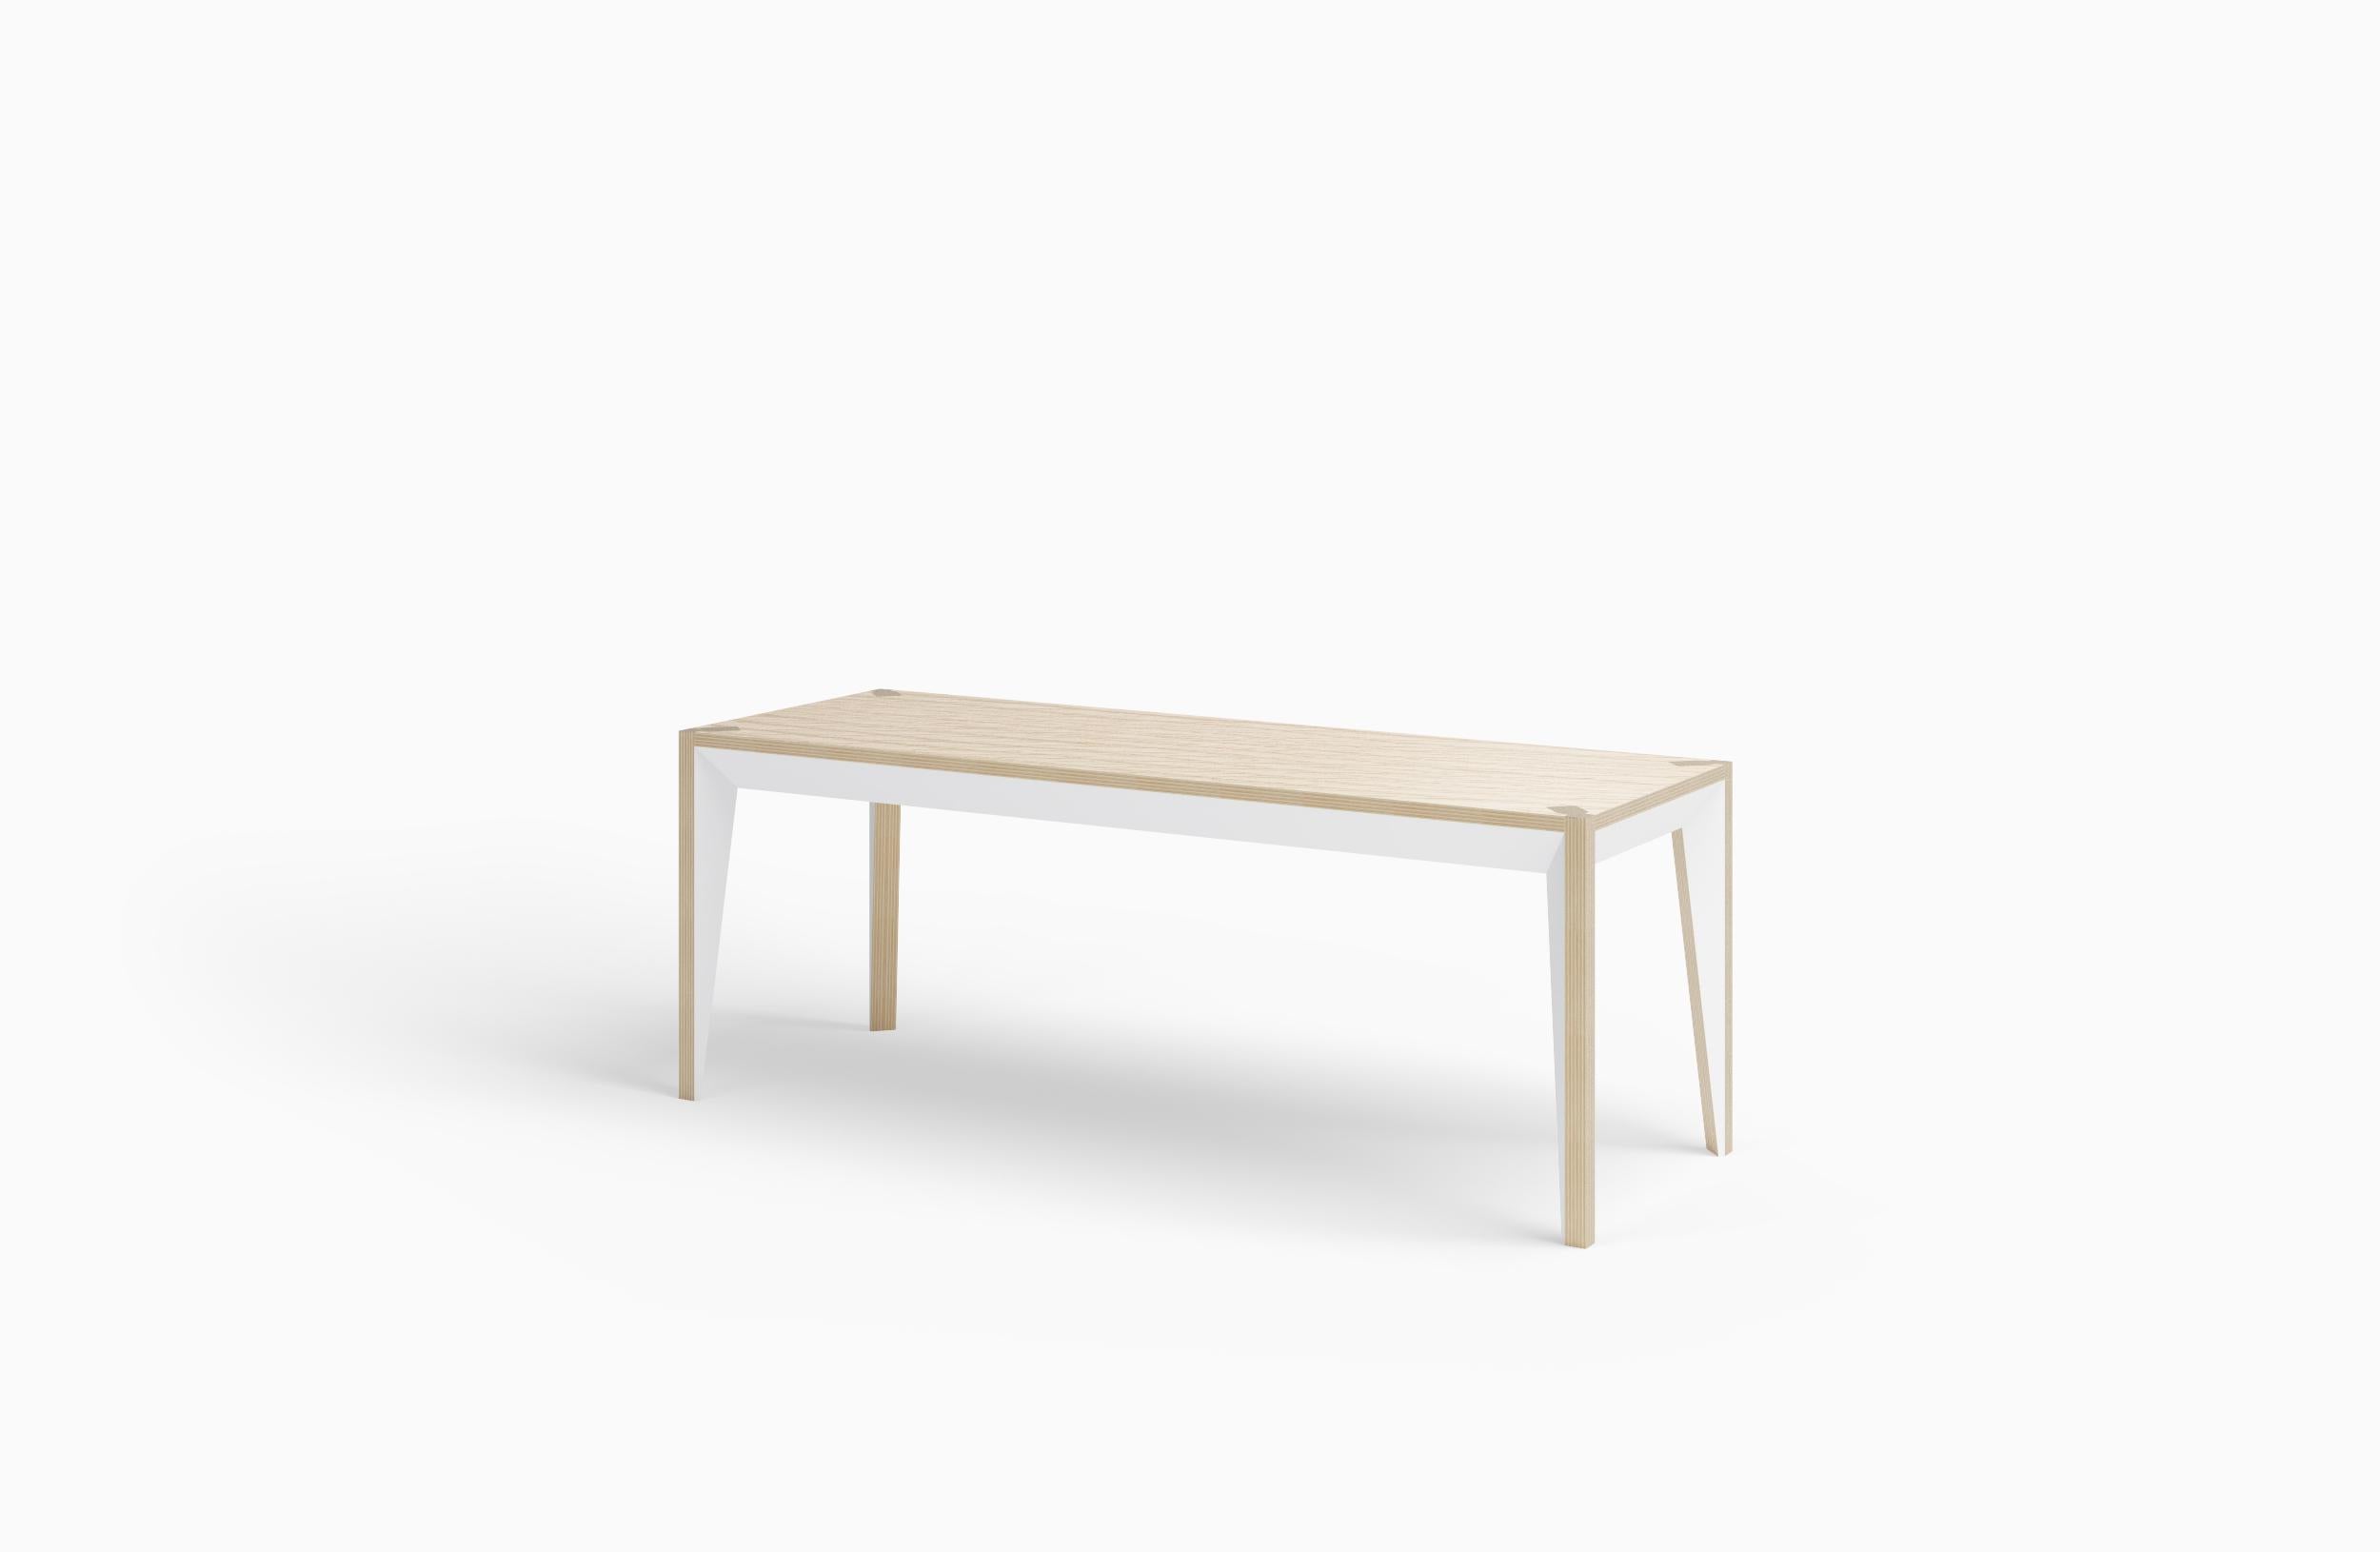 Merging clean lines with warm materials, the faceted geometry of the MiMi bench creates a slender, elegant profile punctuated with painted surfaces that capture light. This modern and graceful design looks great from all angles. 
The MiMi line was